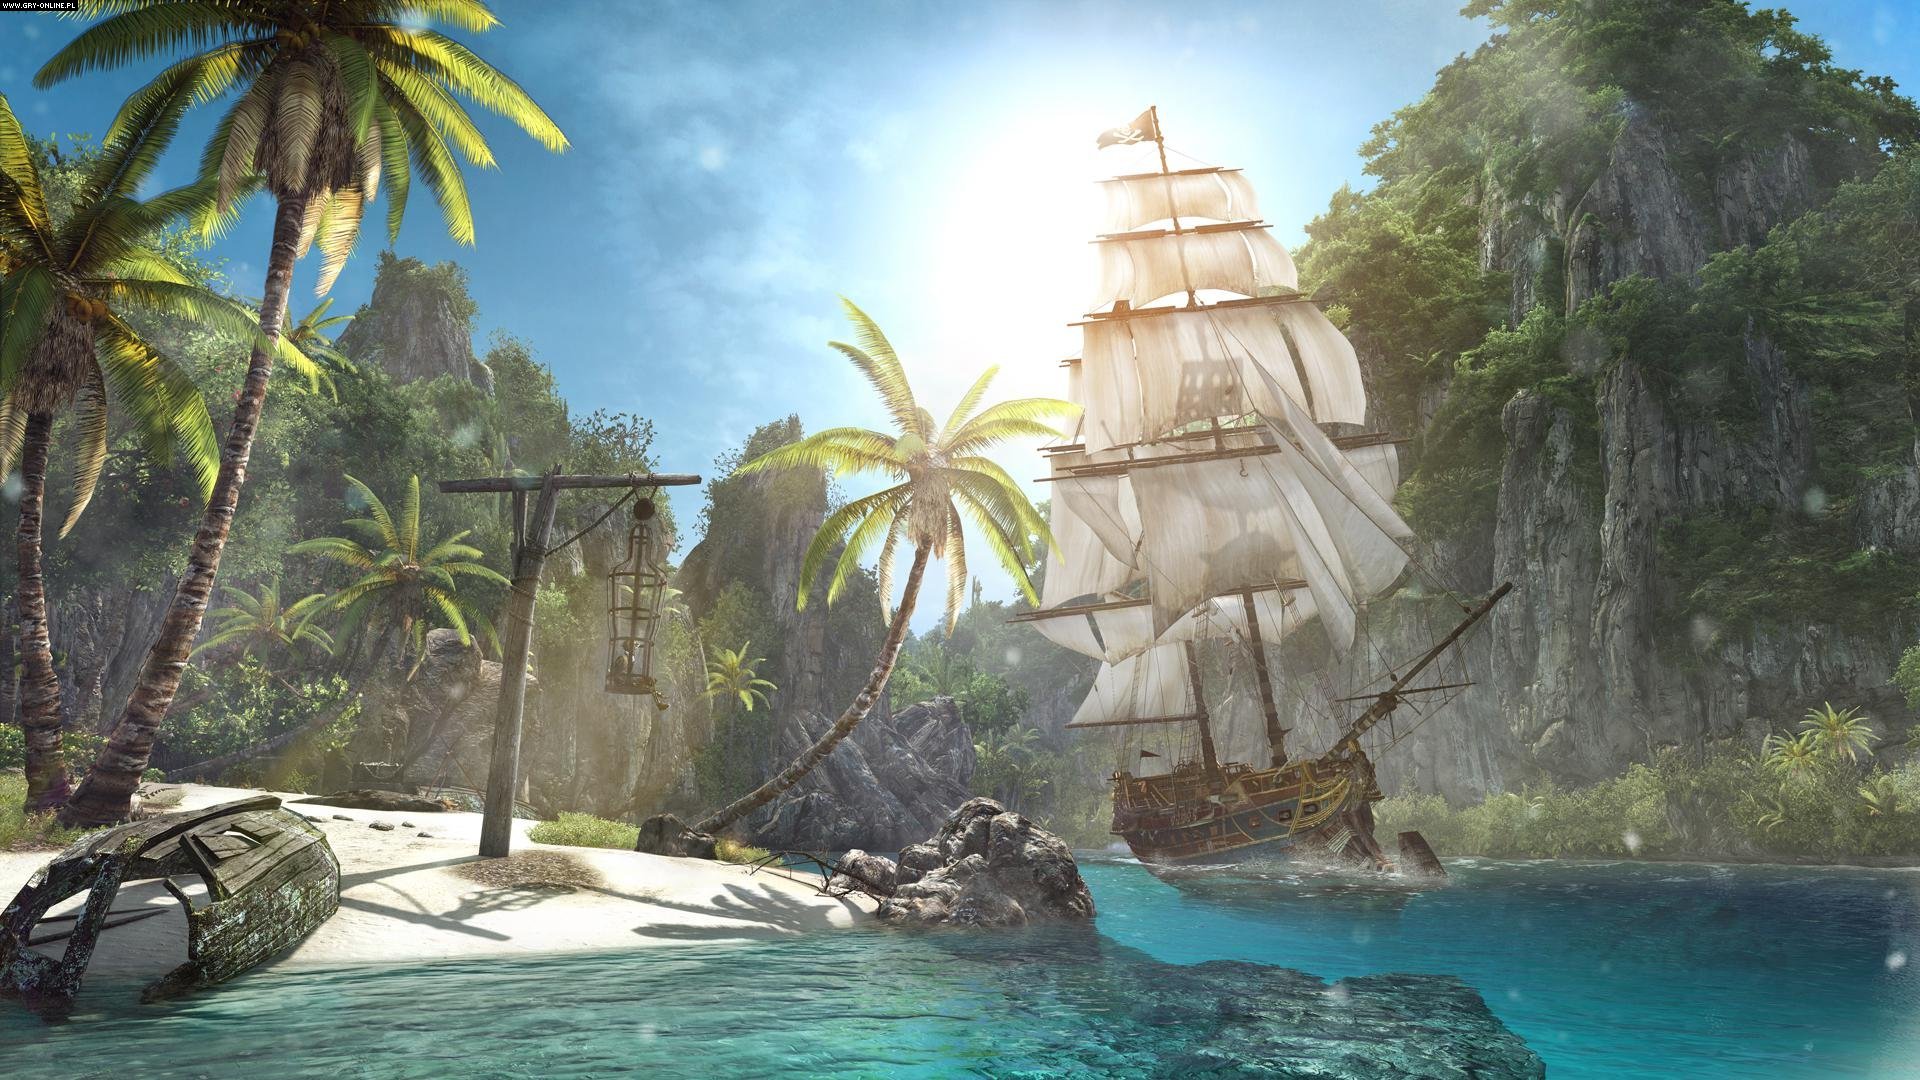 assassin's creed iv: black flag, assassin's creed, video game